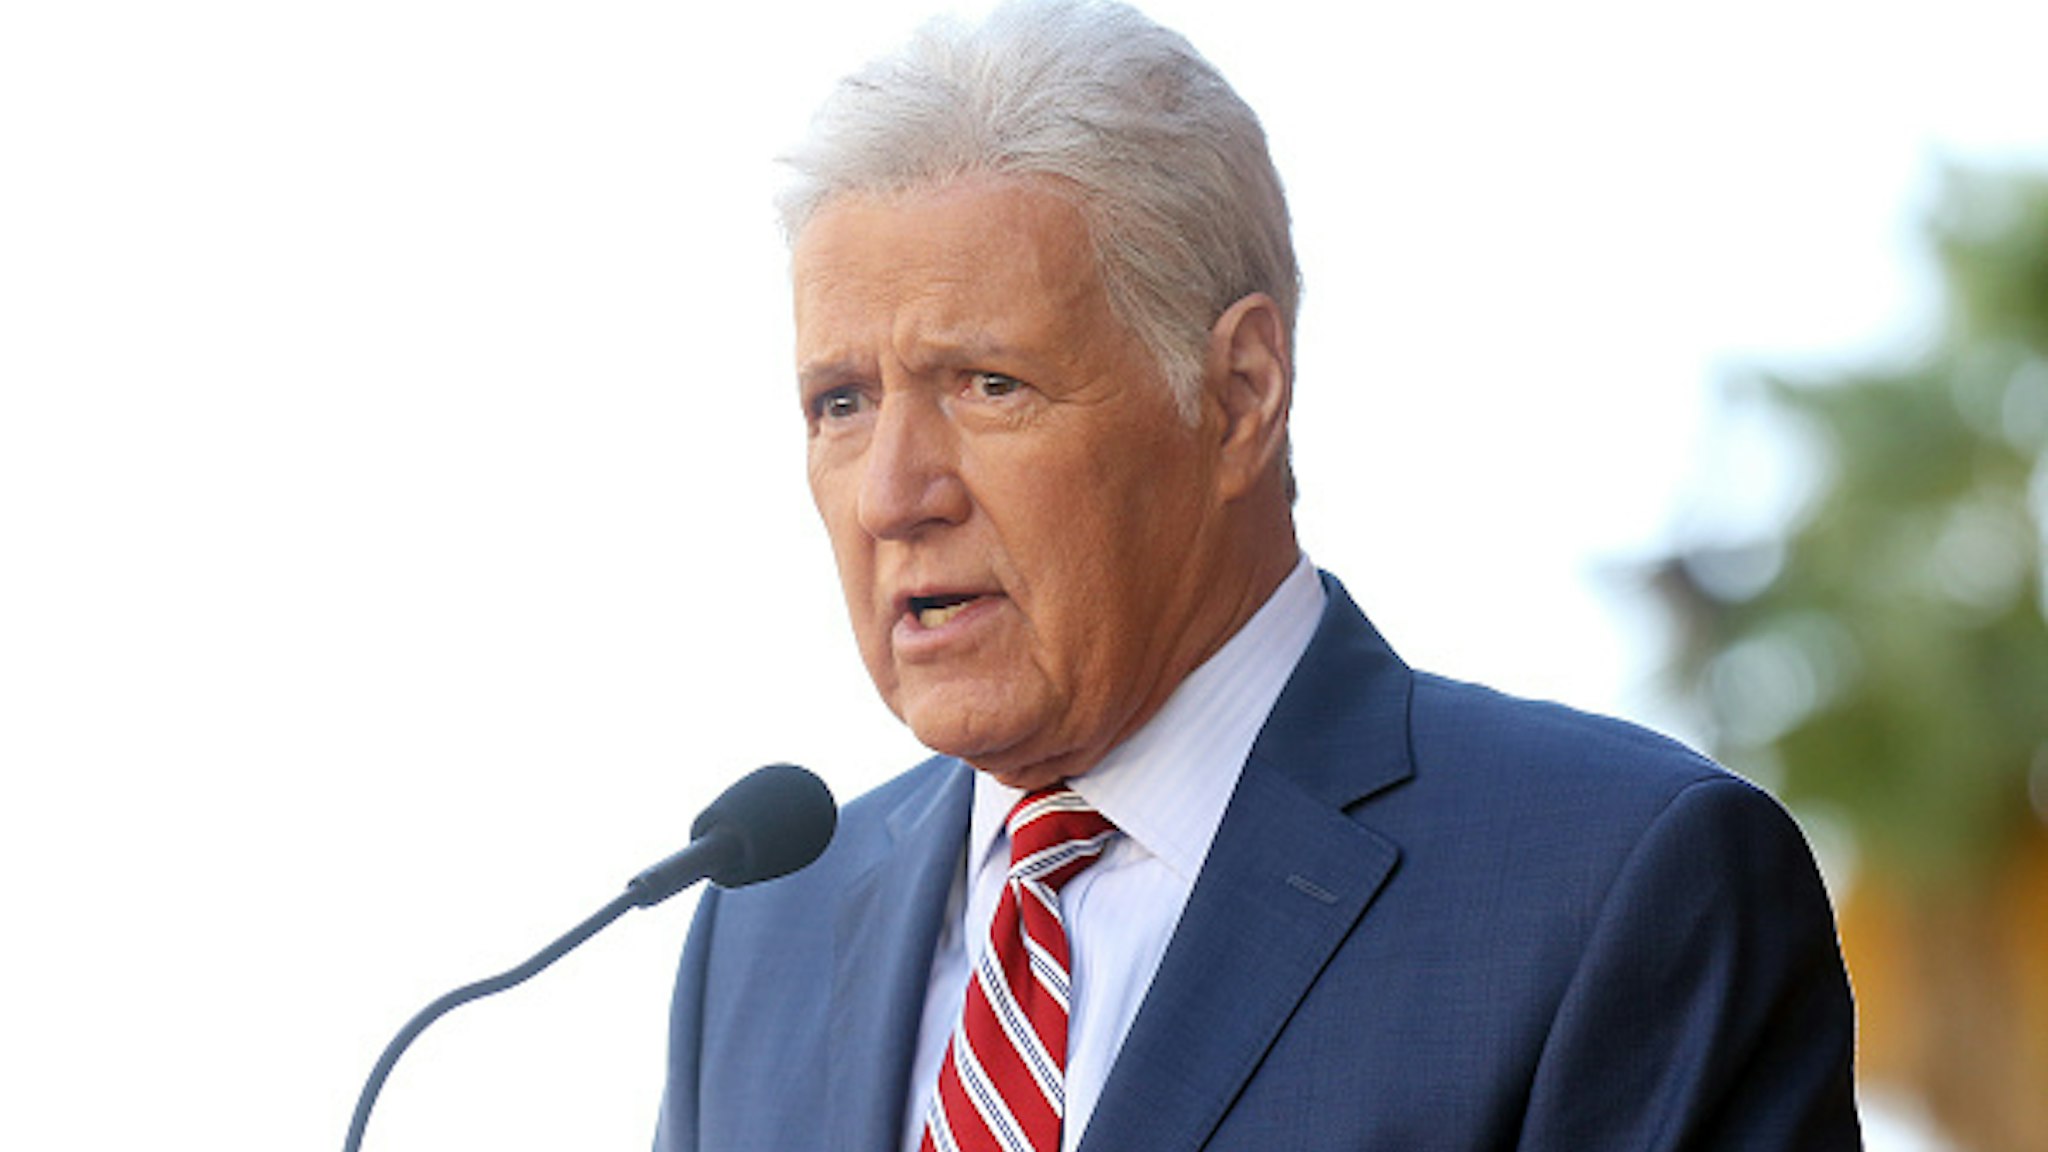 HOLLYWOOD, CALIFORNIA - NOVEMBER 01: Alex Trebek speaks at the ceremony honoring Harry Friedman with a Star on The Hollywood Walk of Fame held on November 01, 2019 in Hollywood, California.